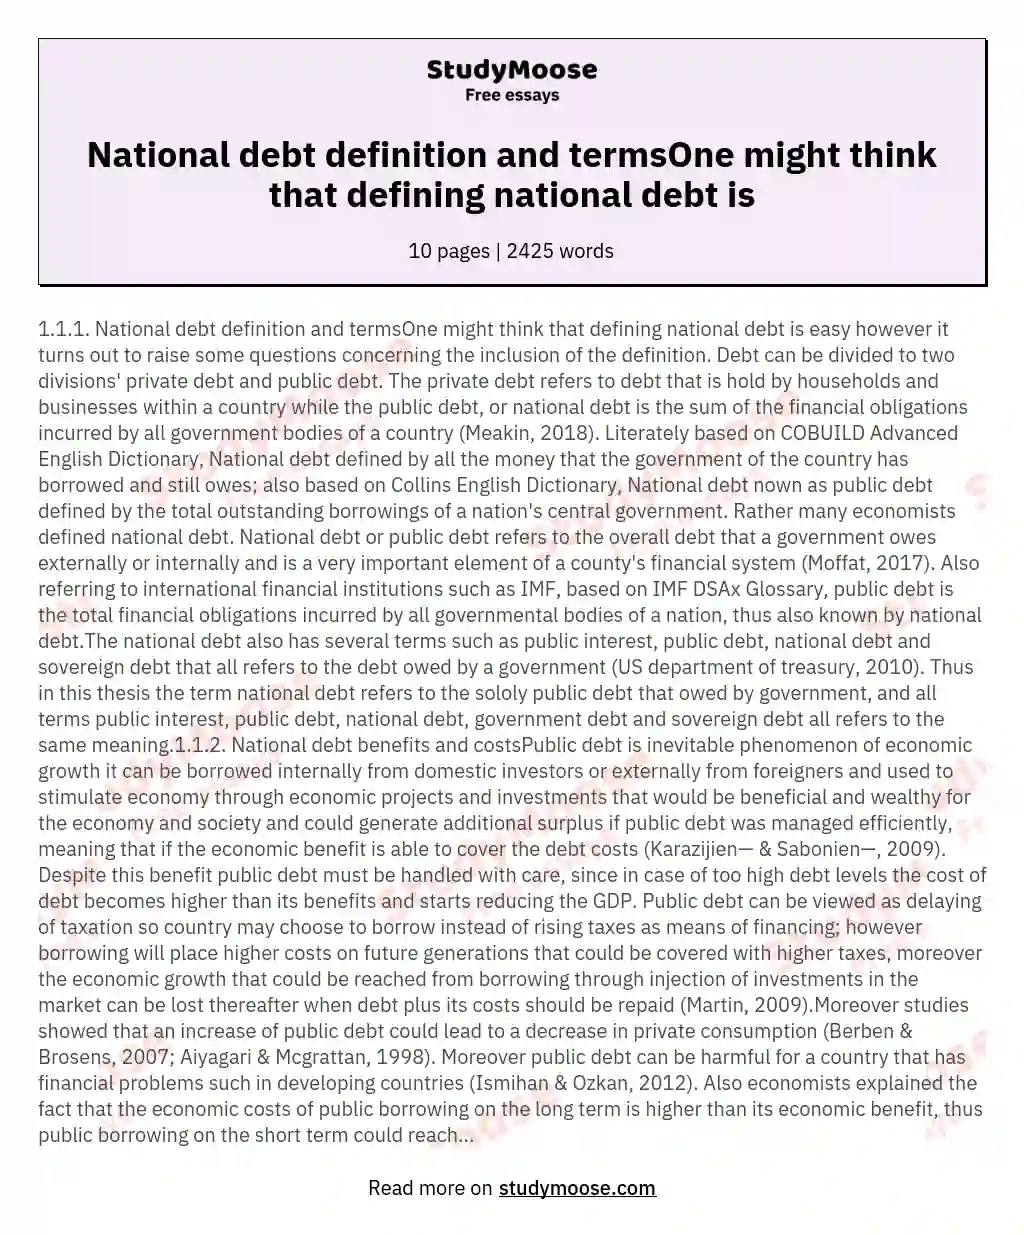 National debt definition and termsOne might think that defining national debt is